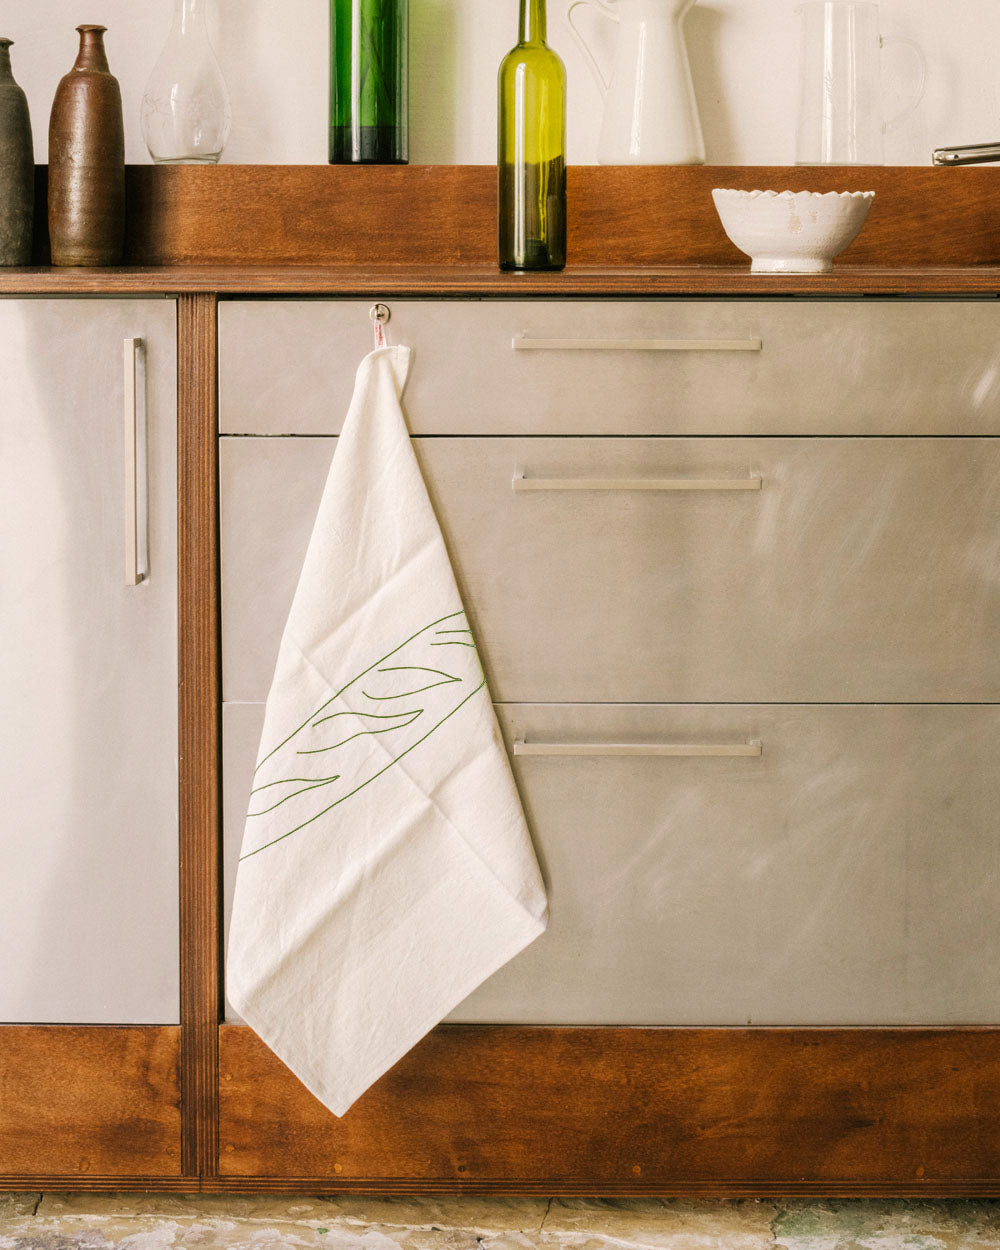 Main, Pain, Couverts Tea Towels - Green